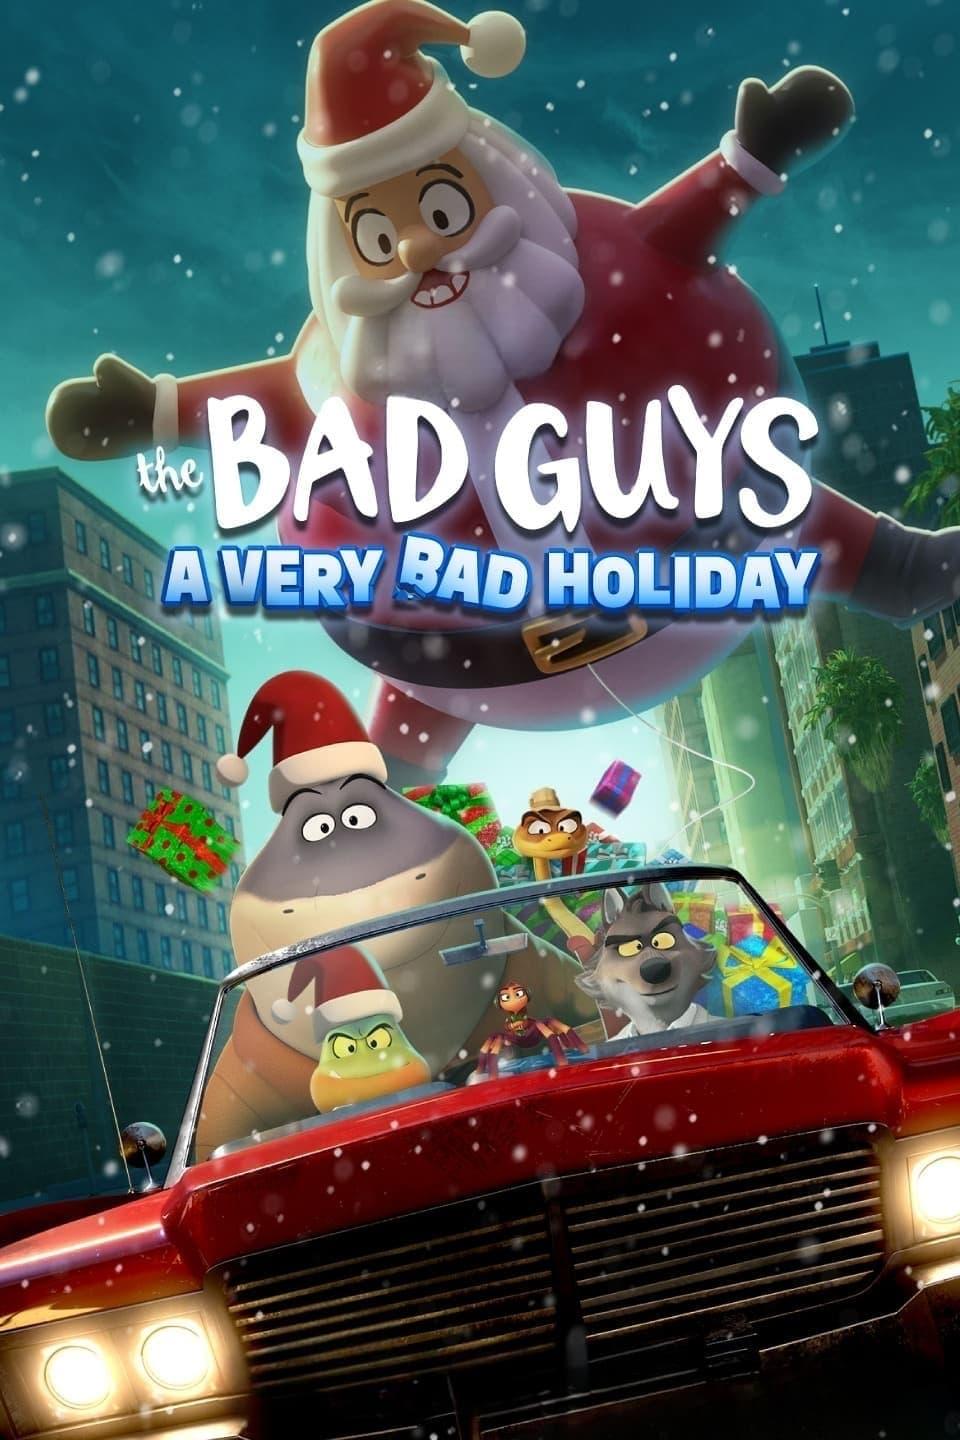 The Bad Guys: A Very Bad Holiday poster